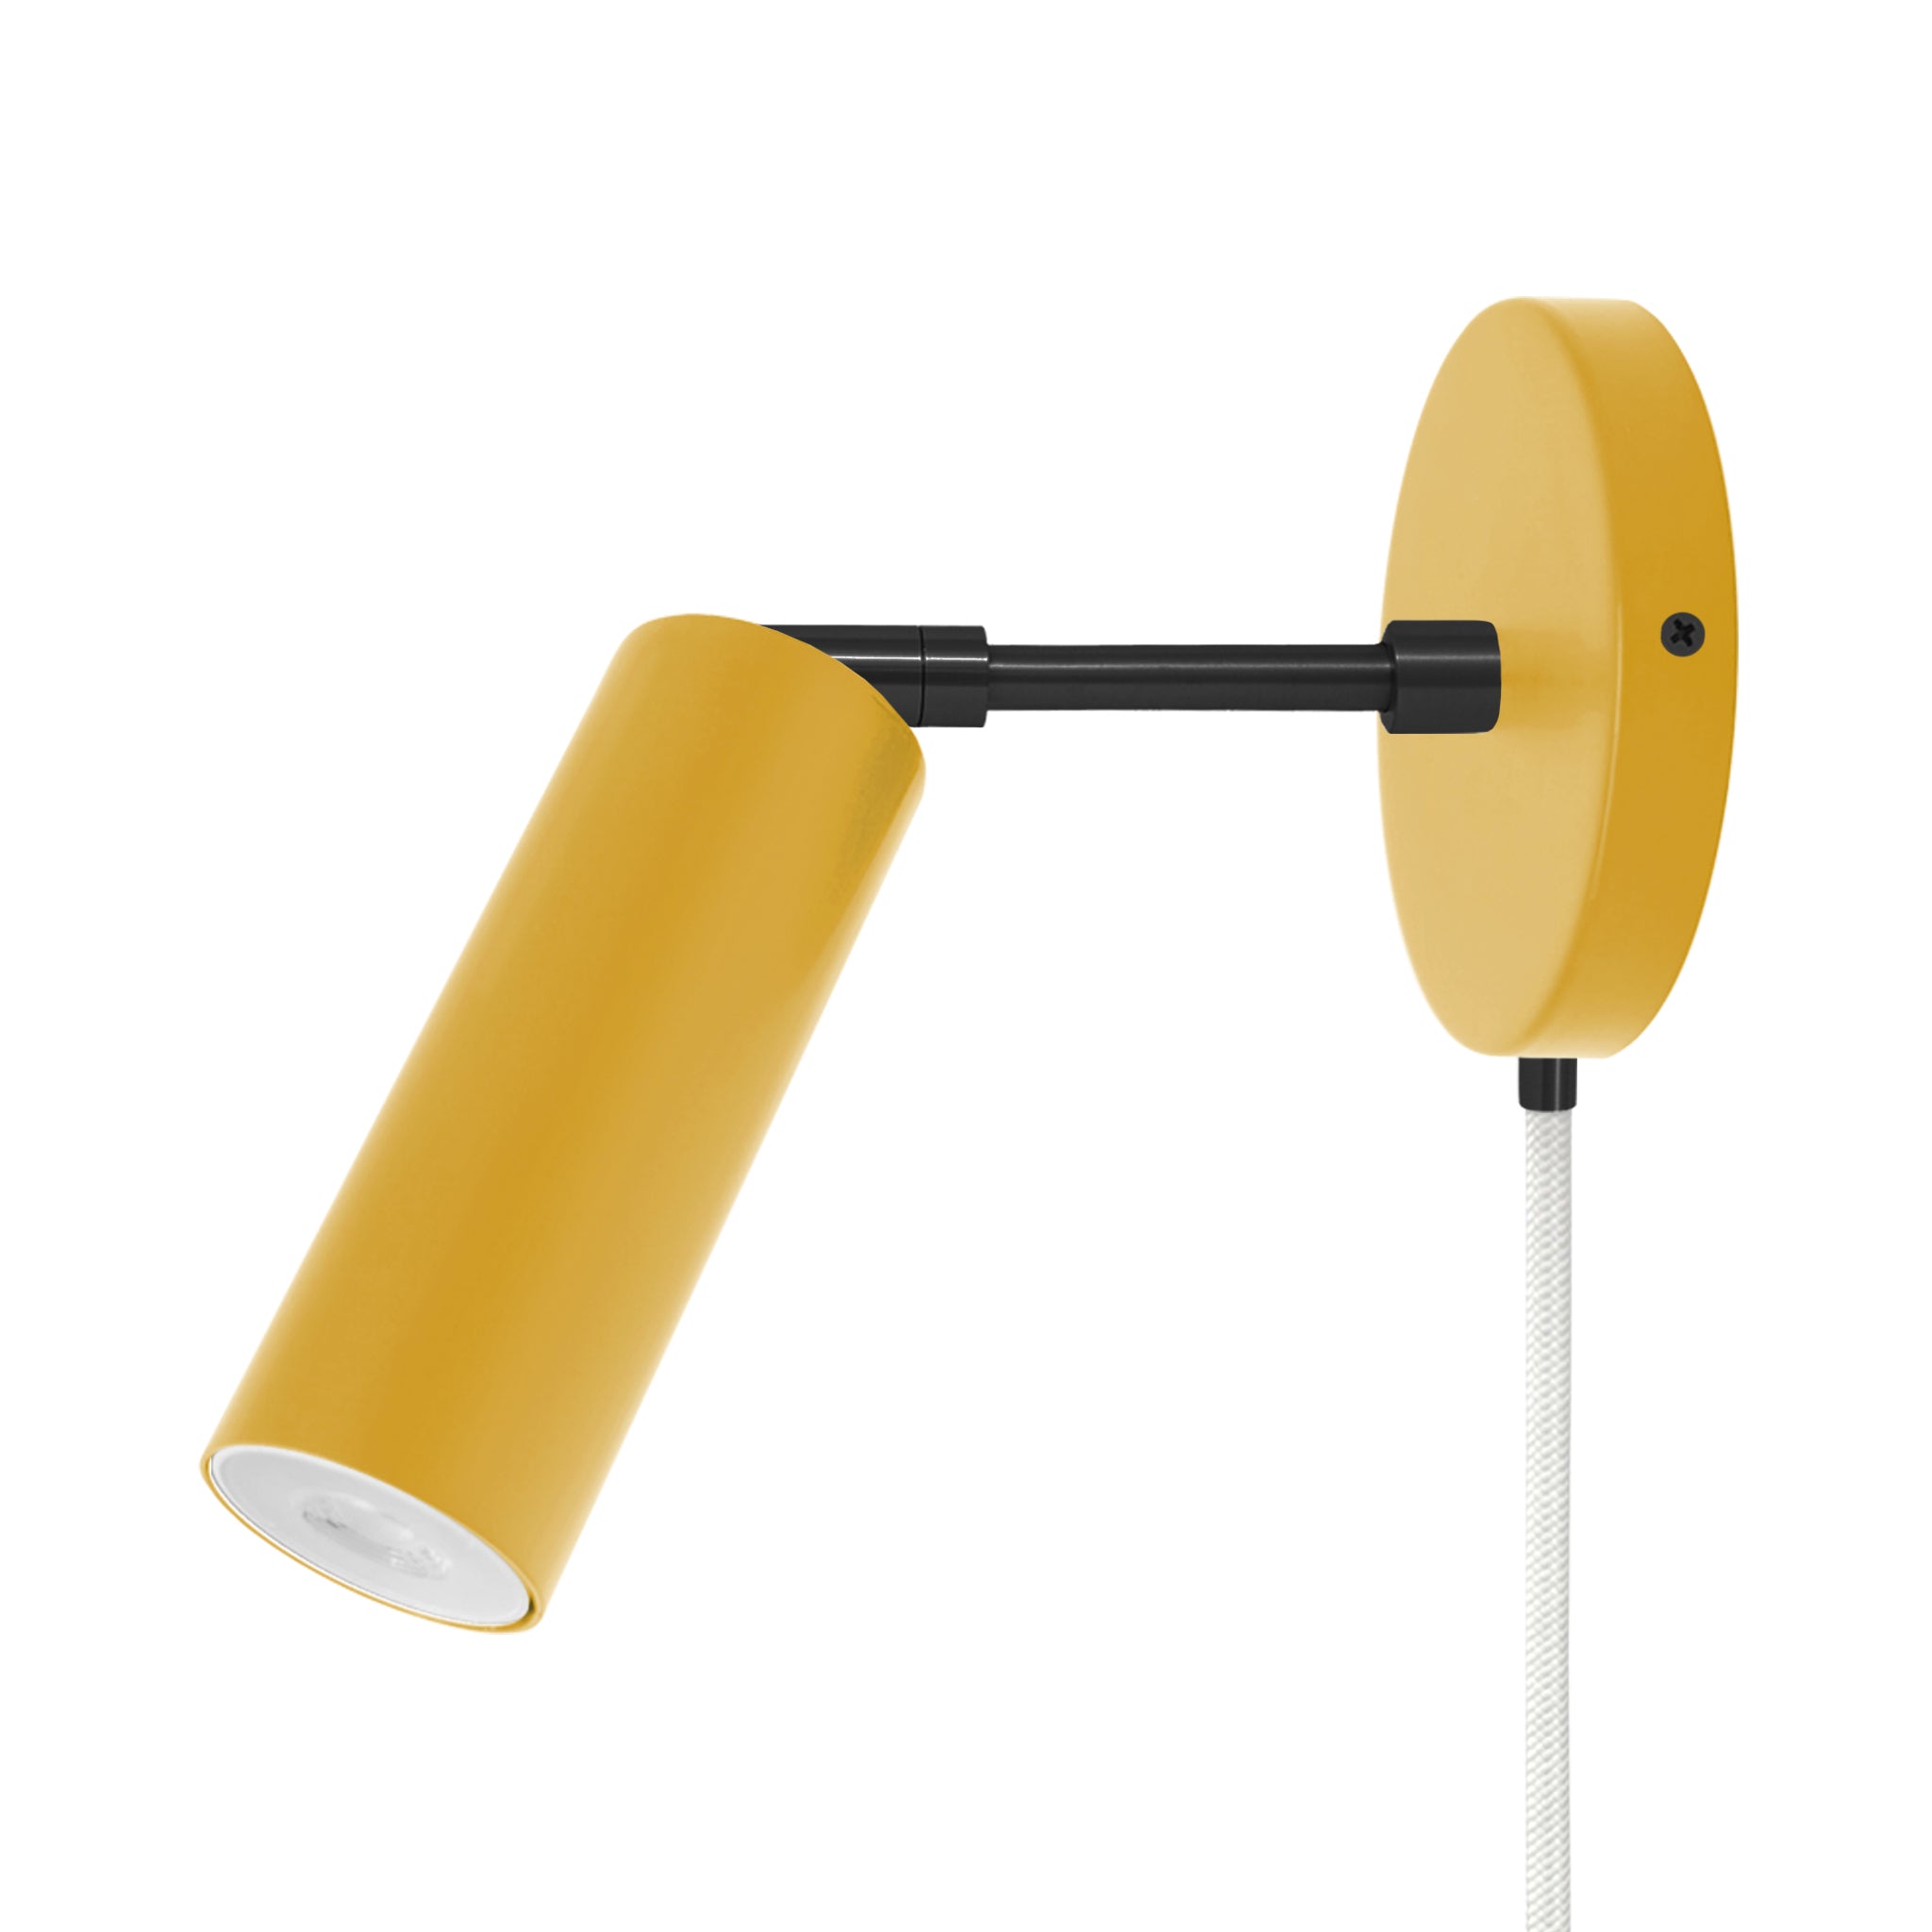 Black and ochre color Reader plug-in sconce 3" arm Dutton Brown lighting